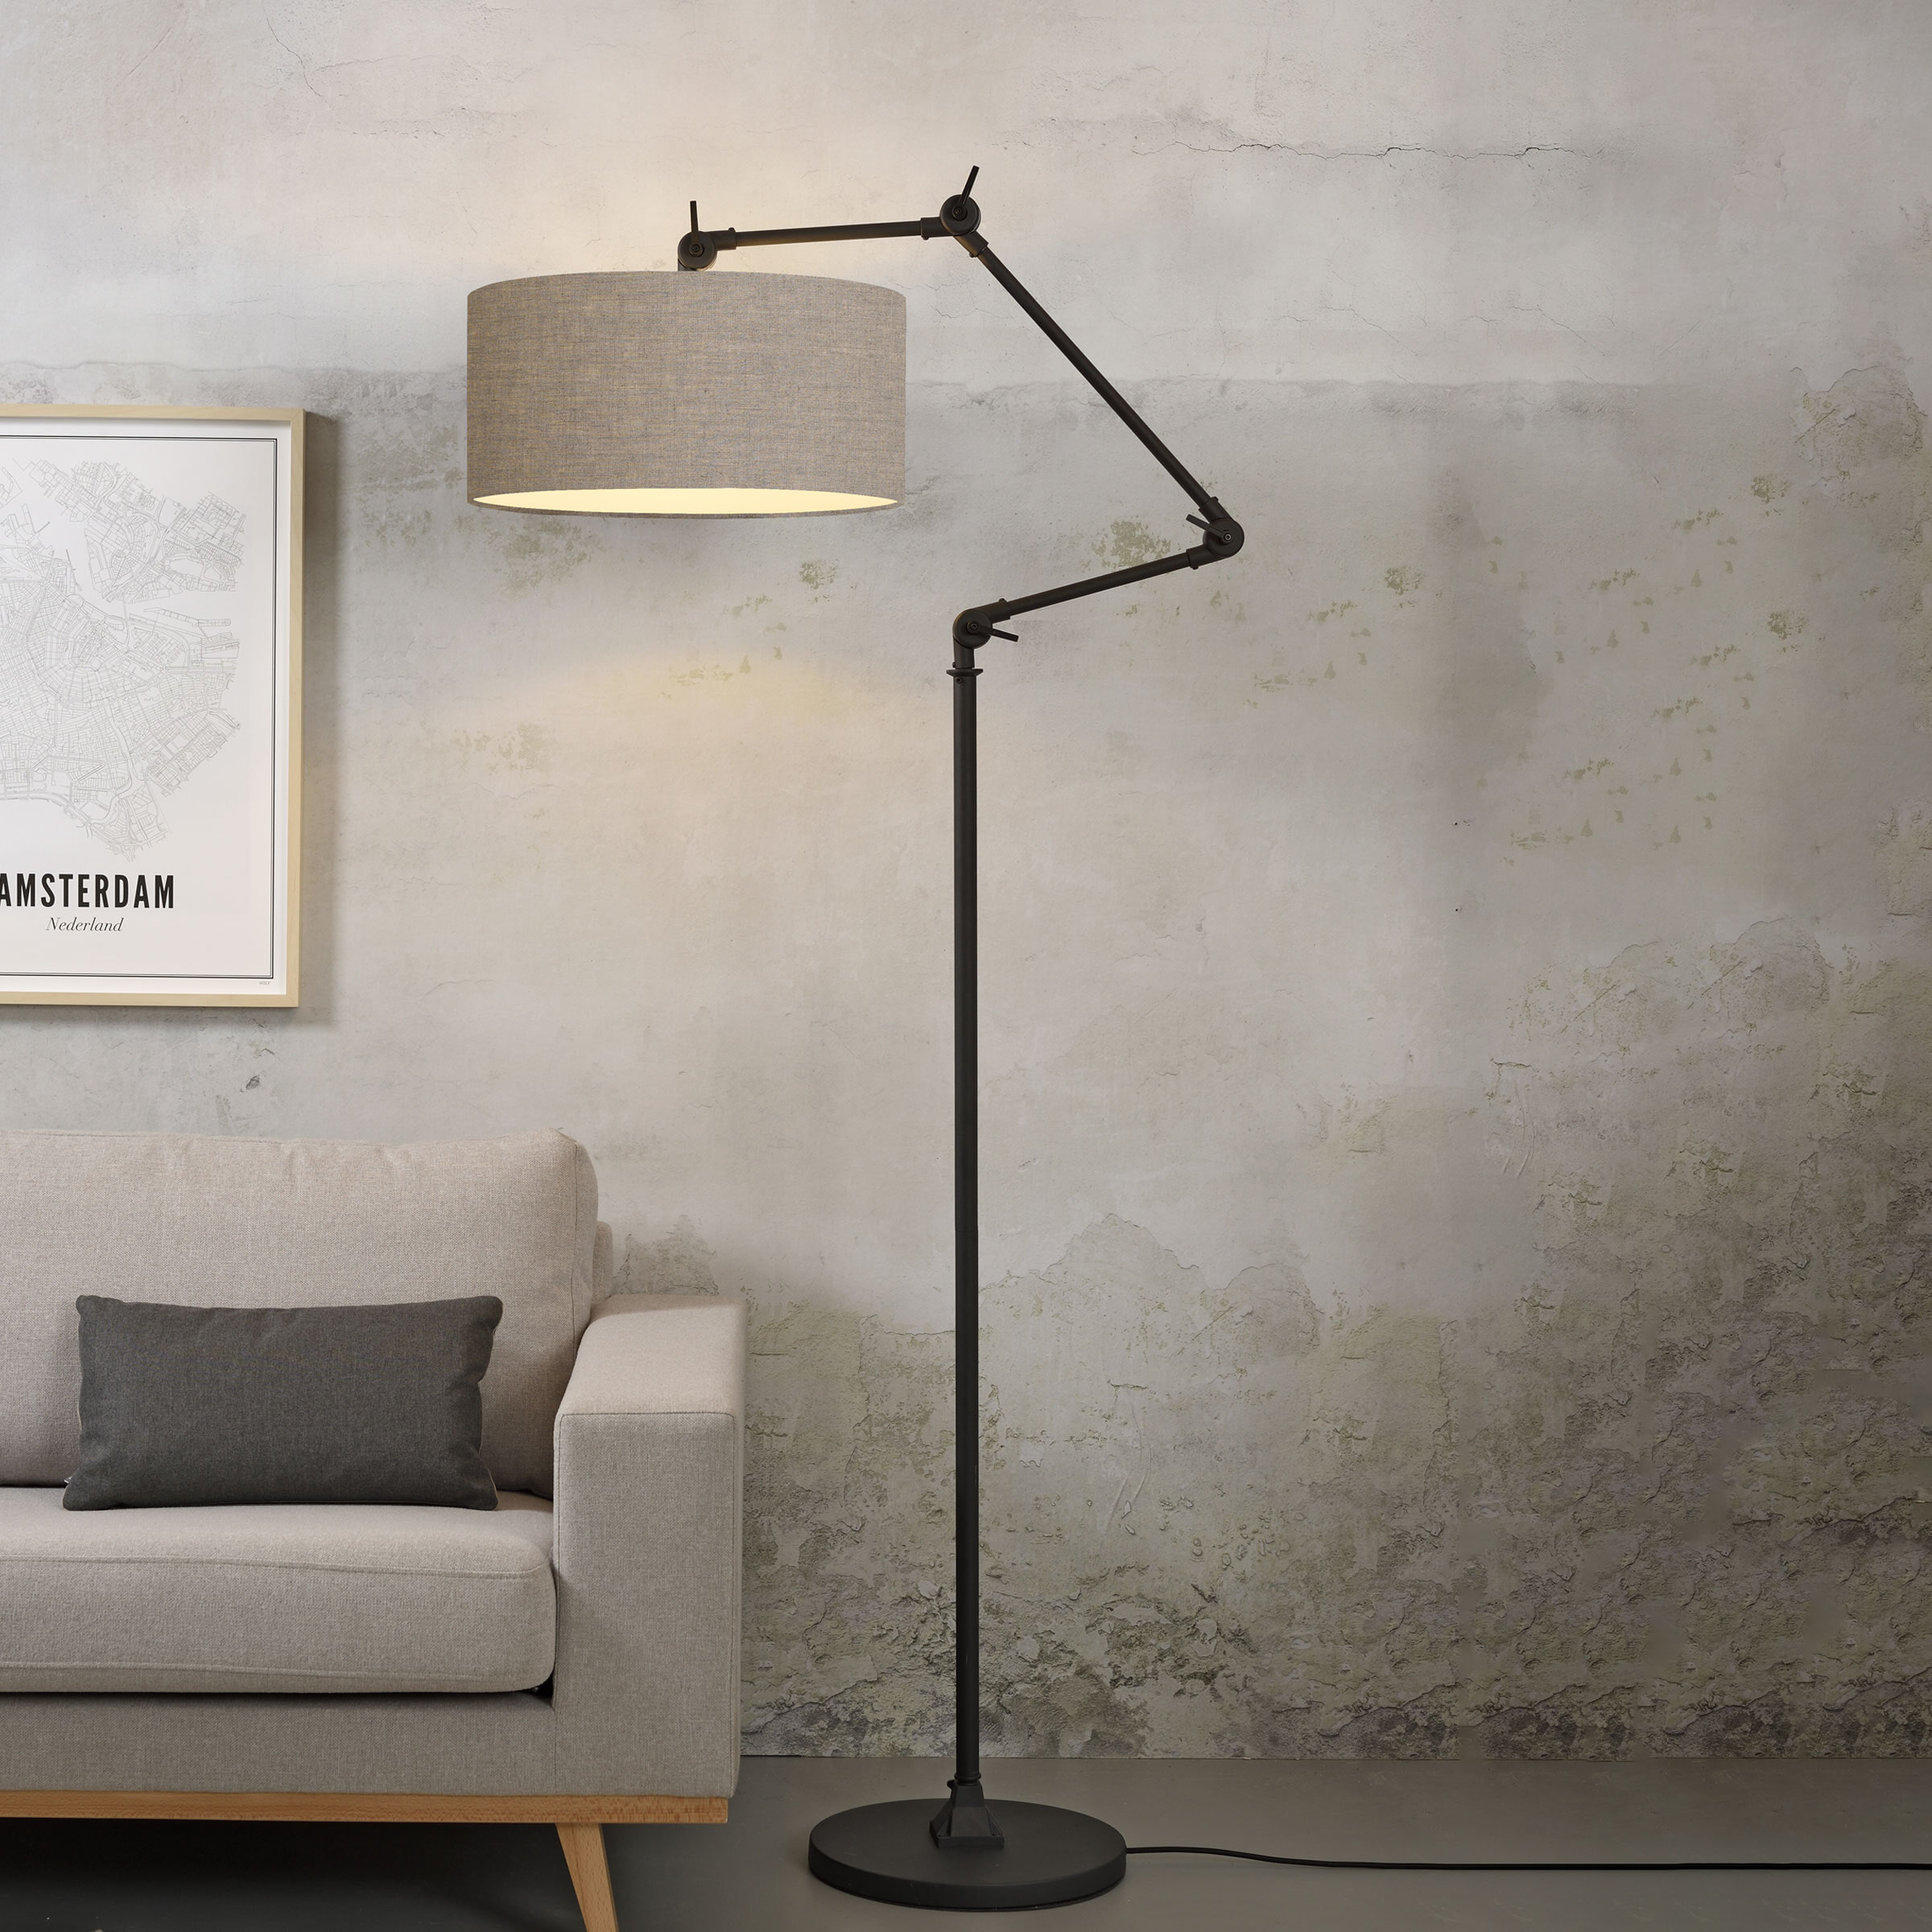 its about RoMi Vloerlamp Amsterdam 190cm - Donkerbeige